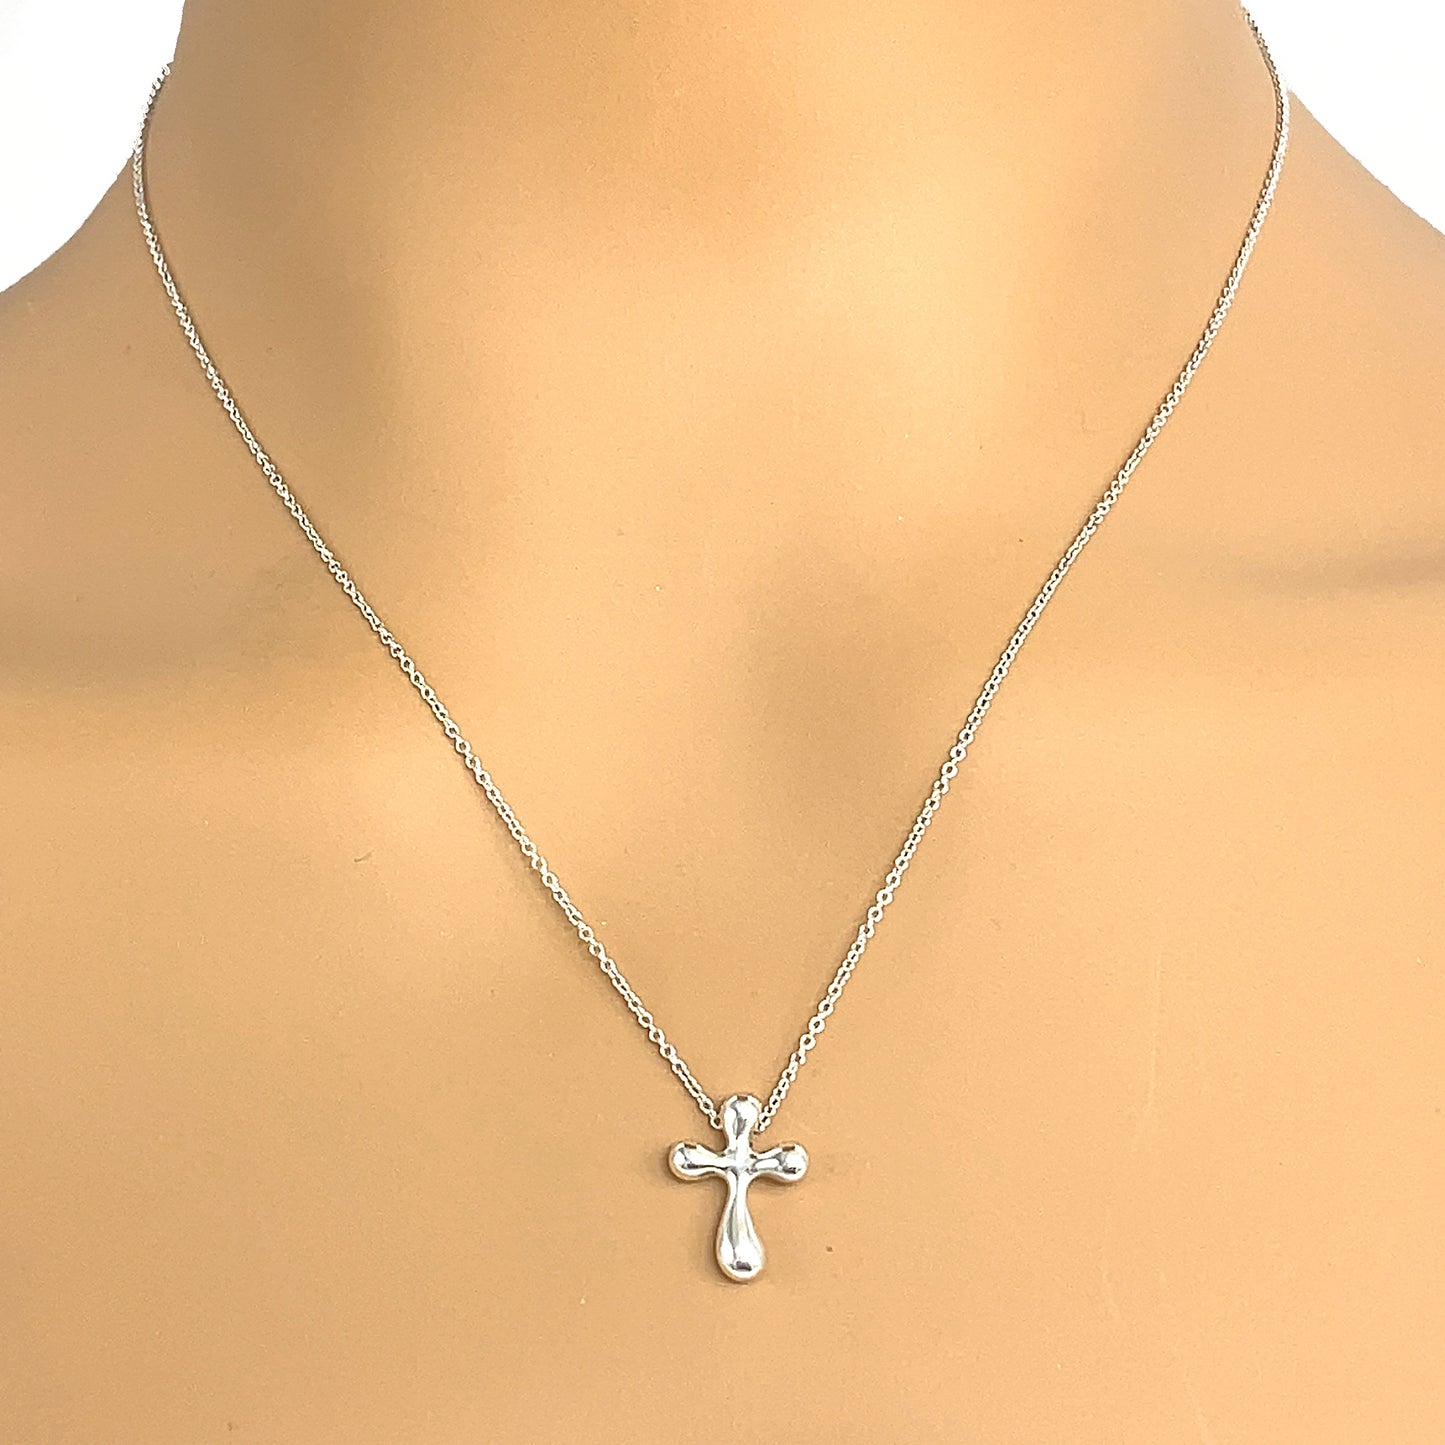 Preowned Tiffany and Co. Sterling Silver Elsa Peretti Cross Pendant Necklace